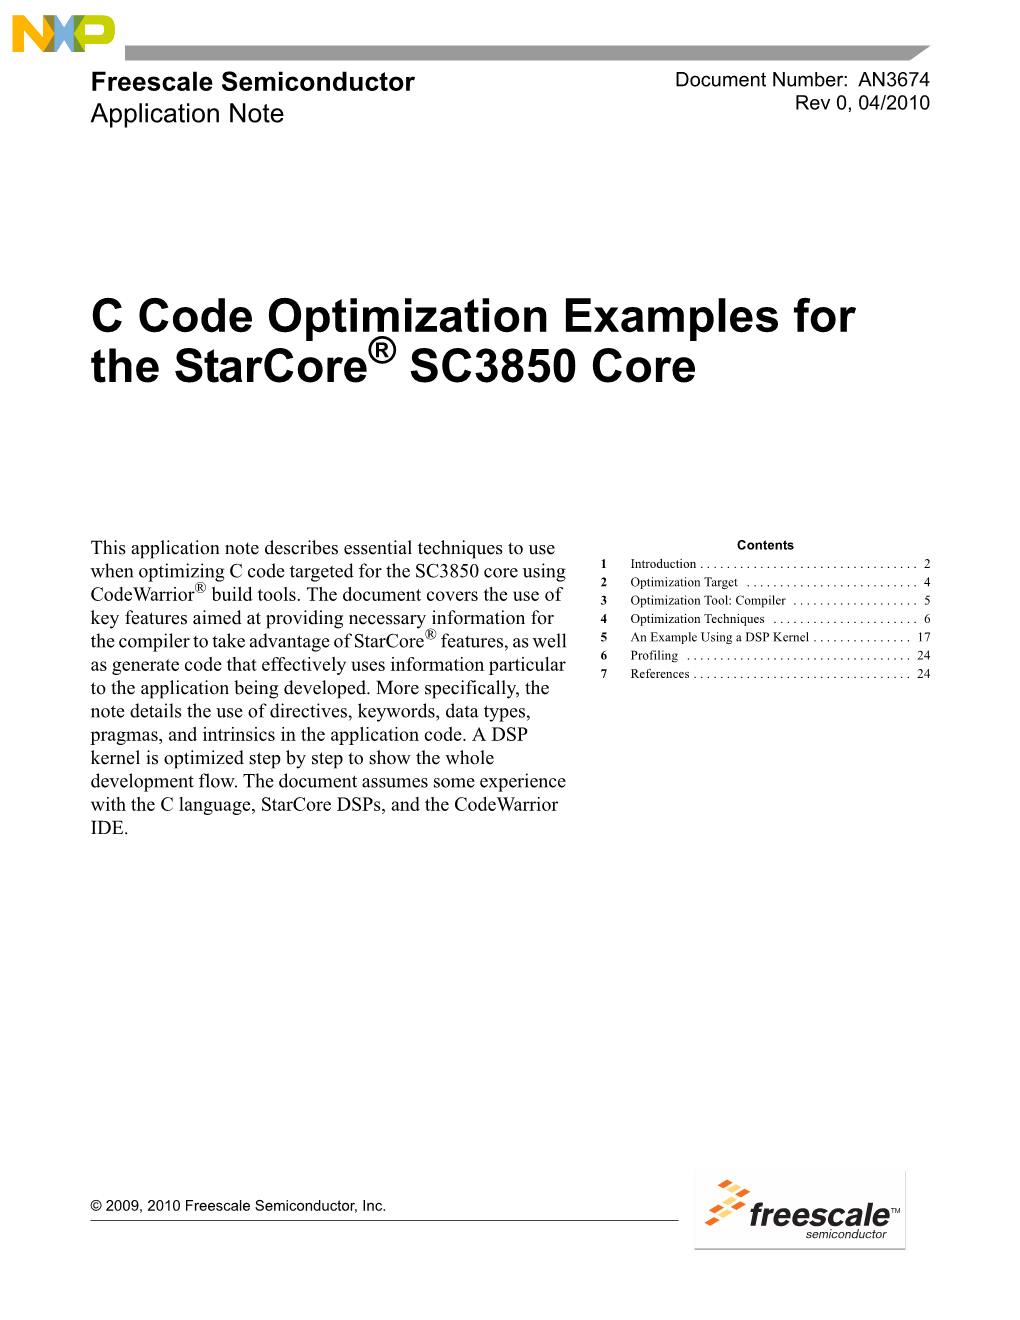 C Code Optimization Examples for the Starcore® SC3850 Core